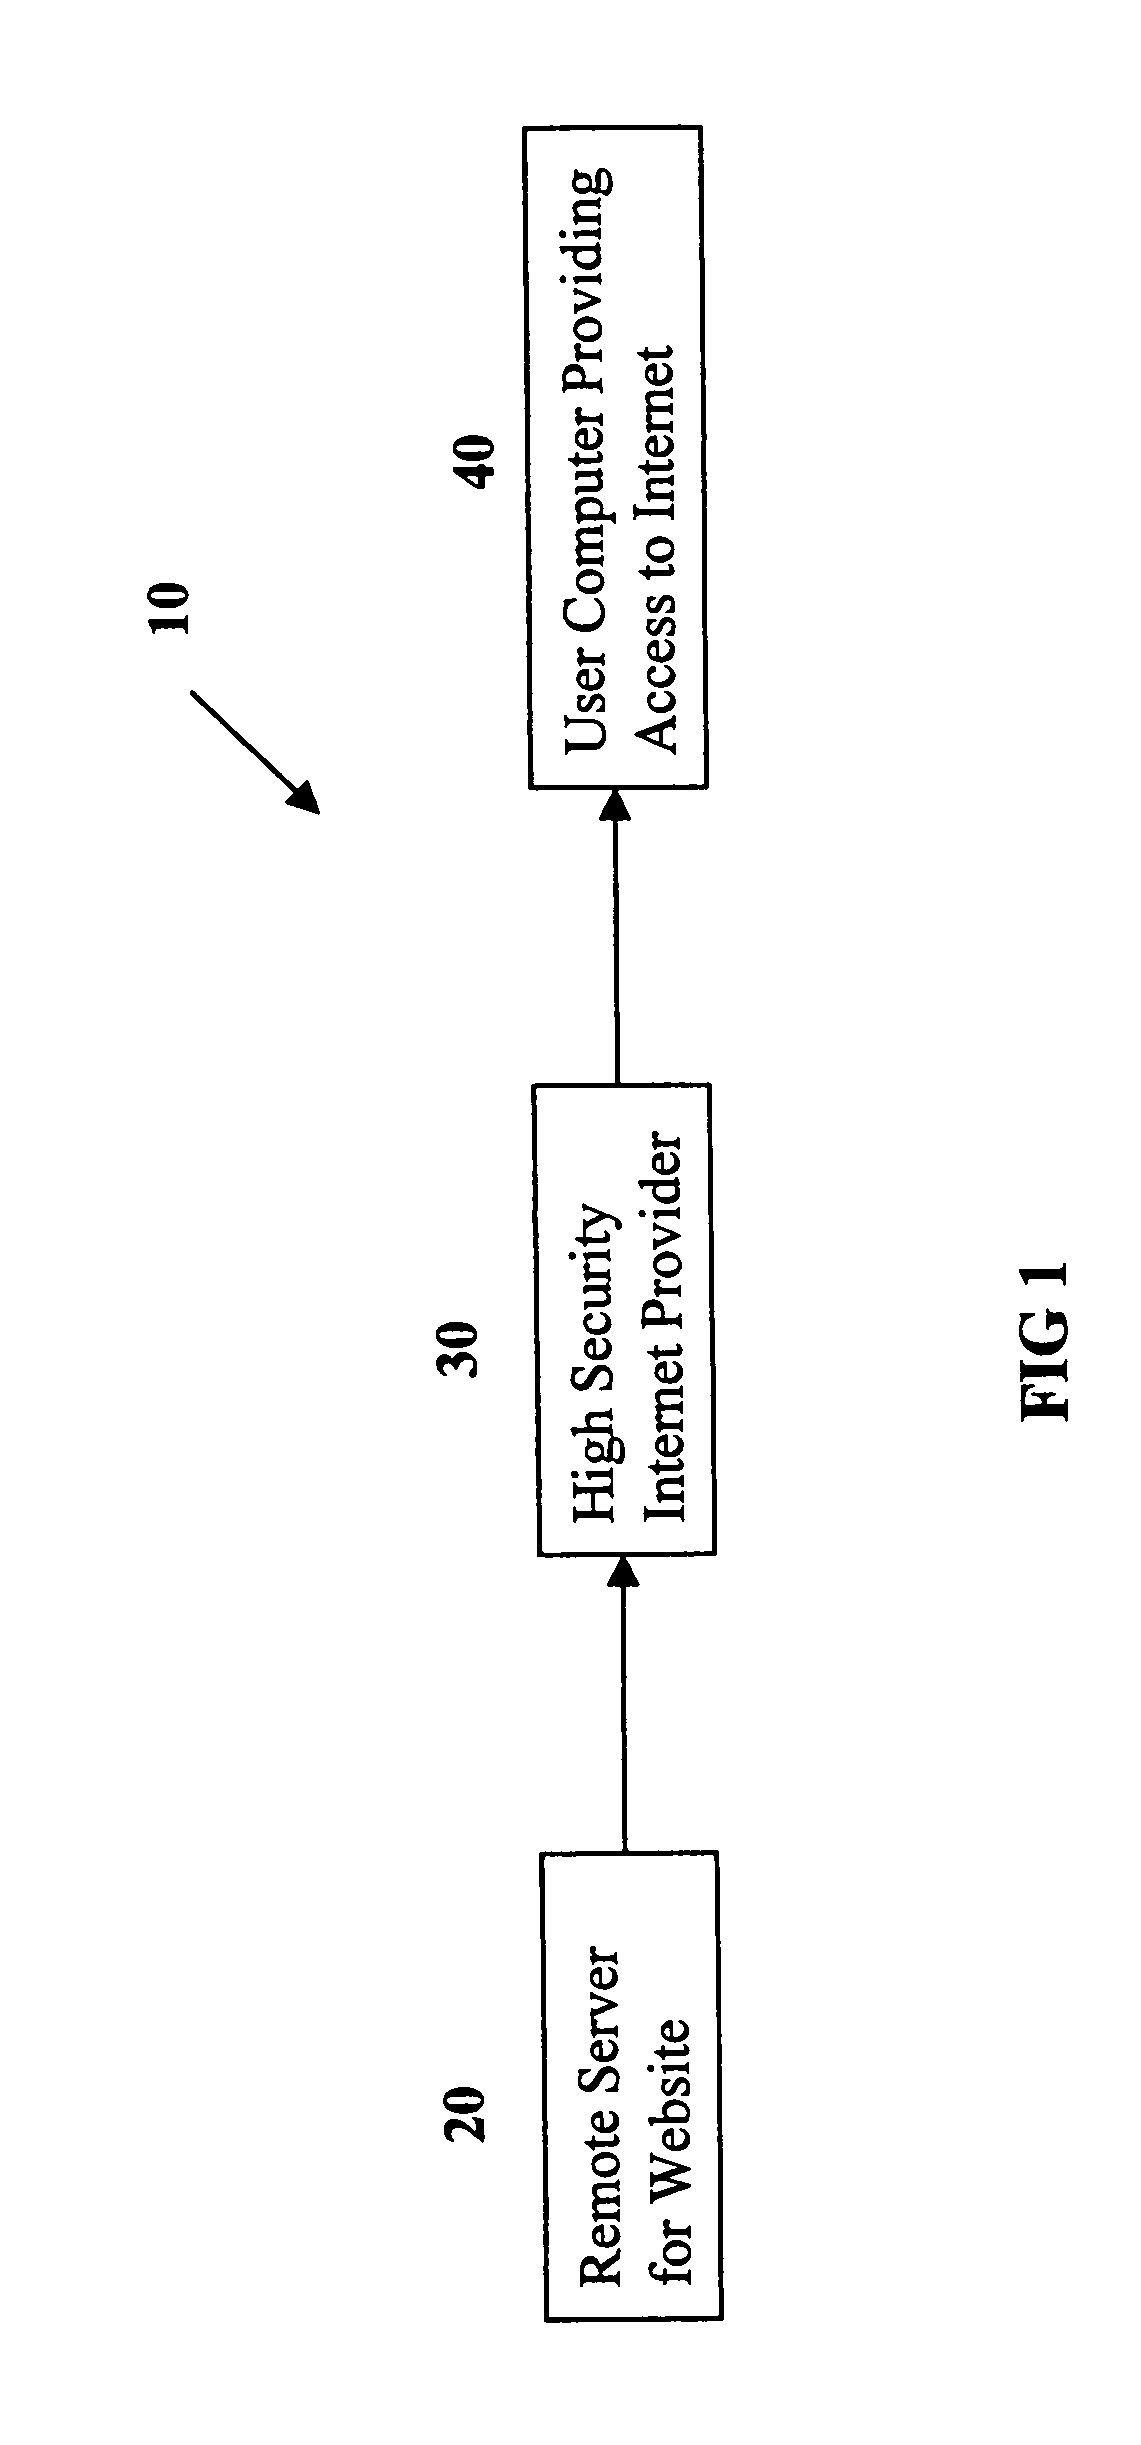 Web-based system and method for screening job candidates